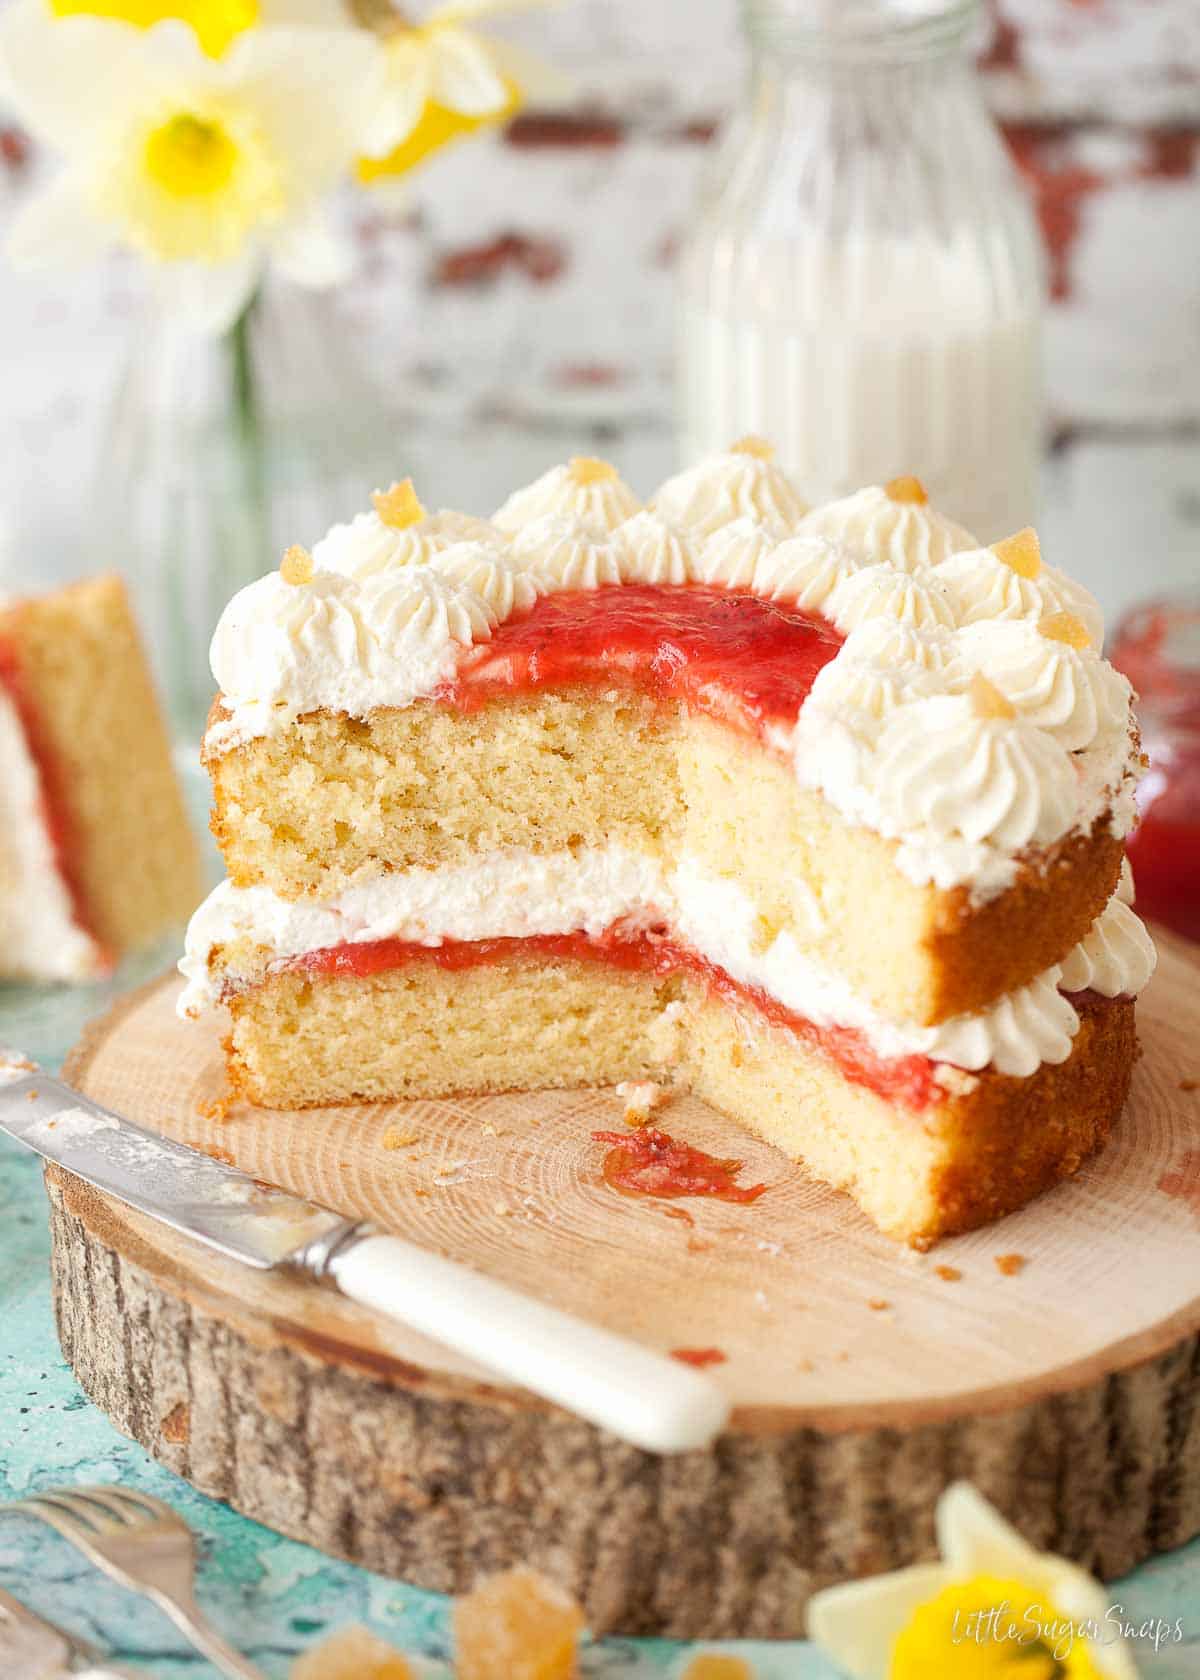 A small sponge cake filled with jam and cream with a few pieces cut from it.